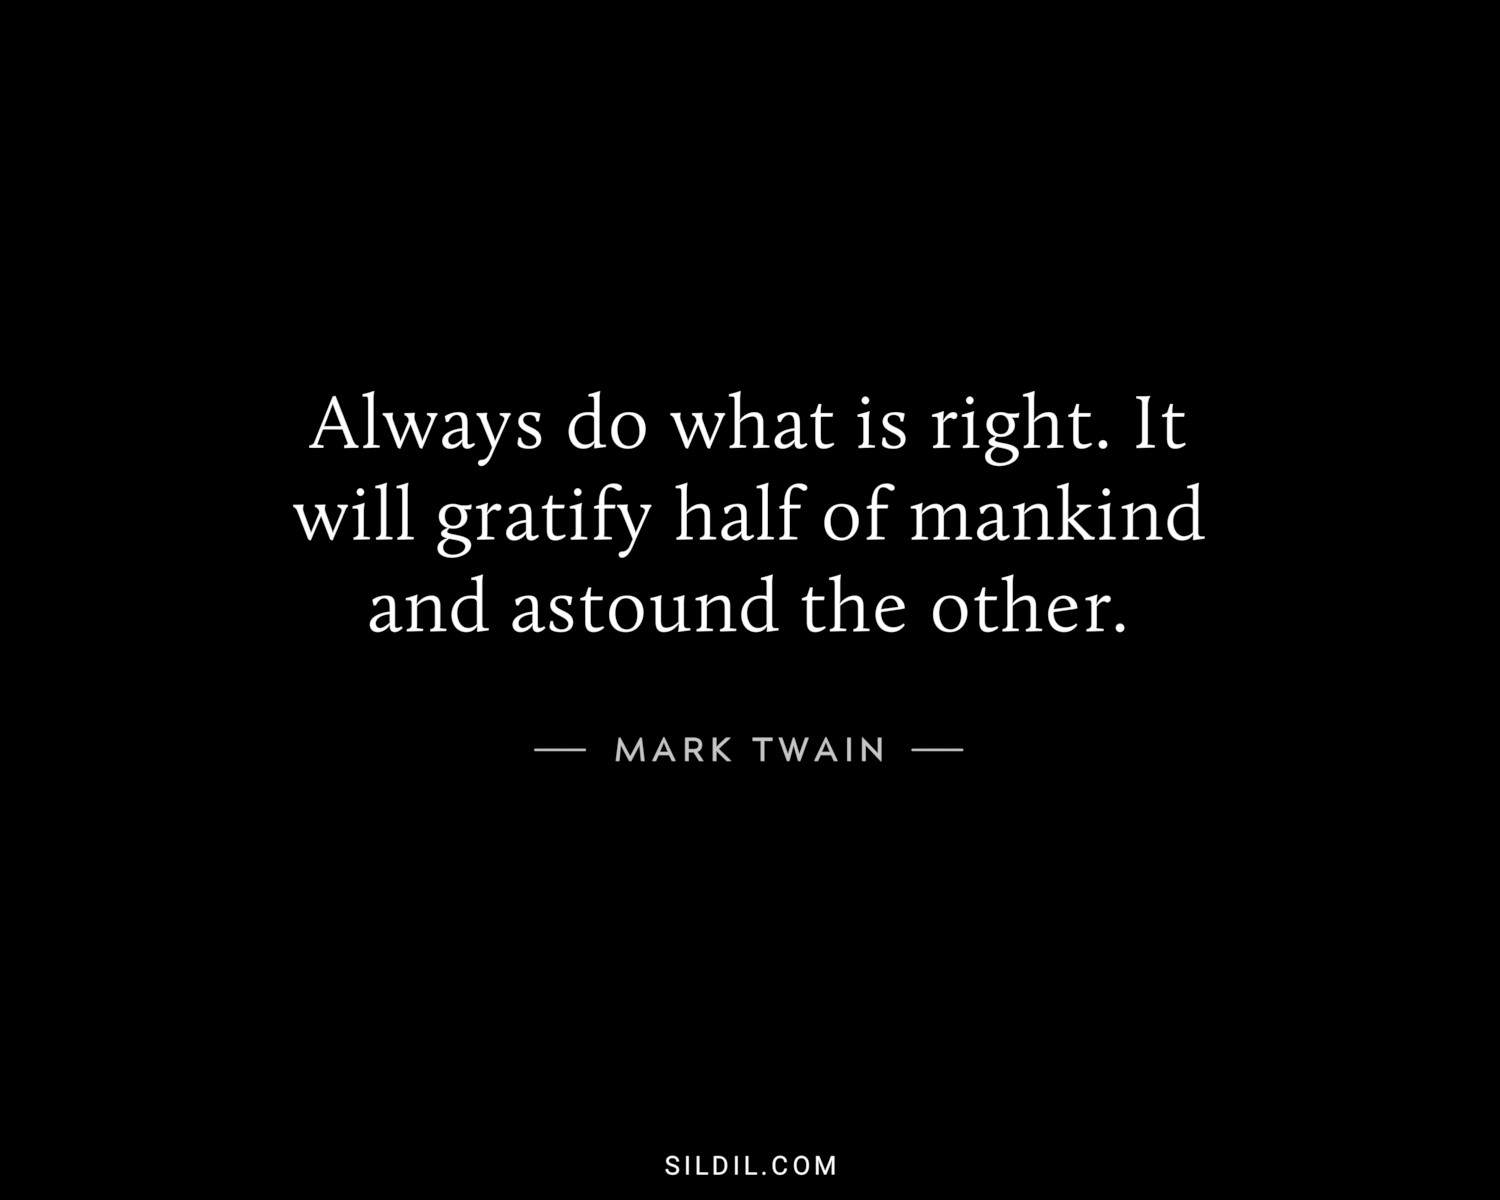 Always do what is right. It will gratify half of mankind and astound the other.